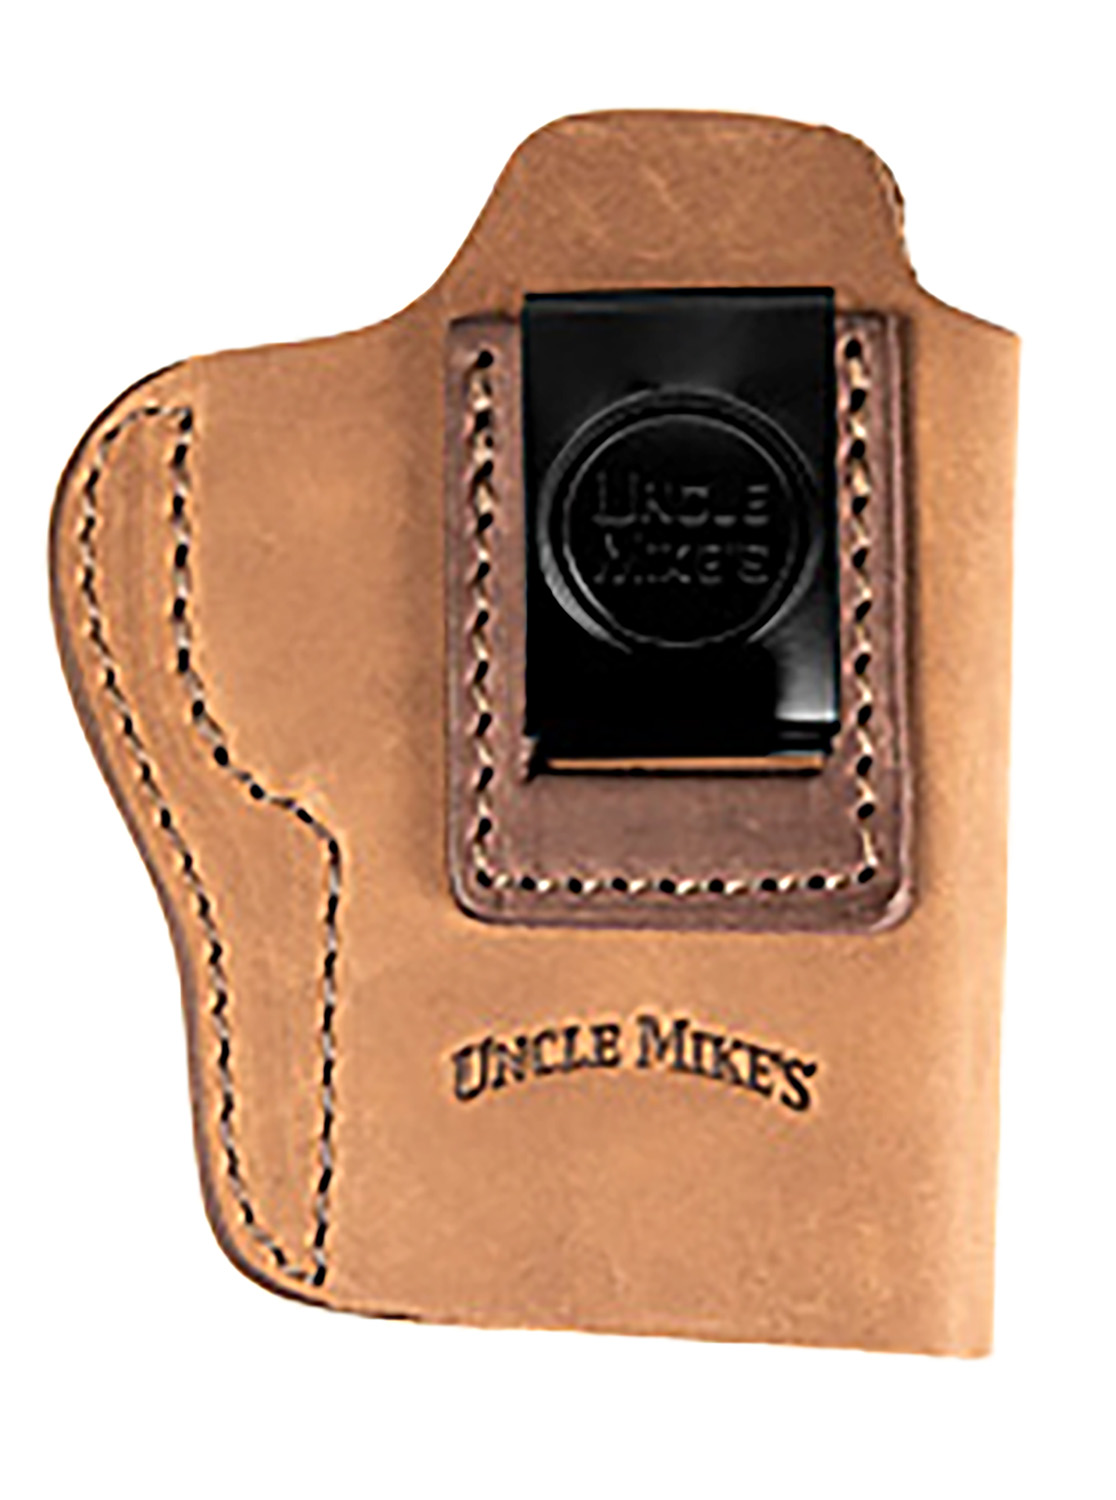 Uncle Mikes-Leather(1791) UMIWB4BRWR Inside The Waistband Holster IWB Size 04 Brown Leather Belt Clip Fits Glock 17/19 R